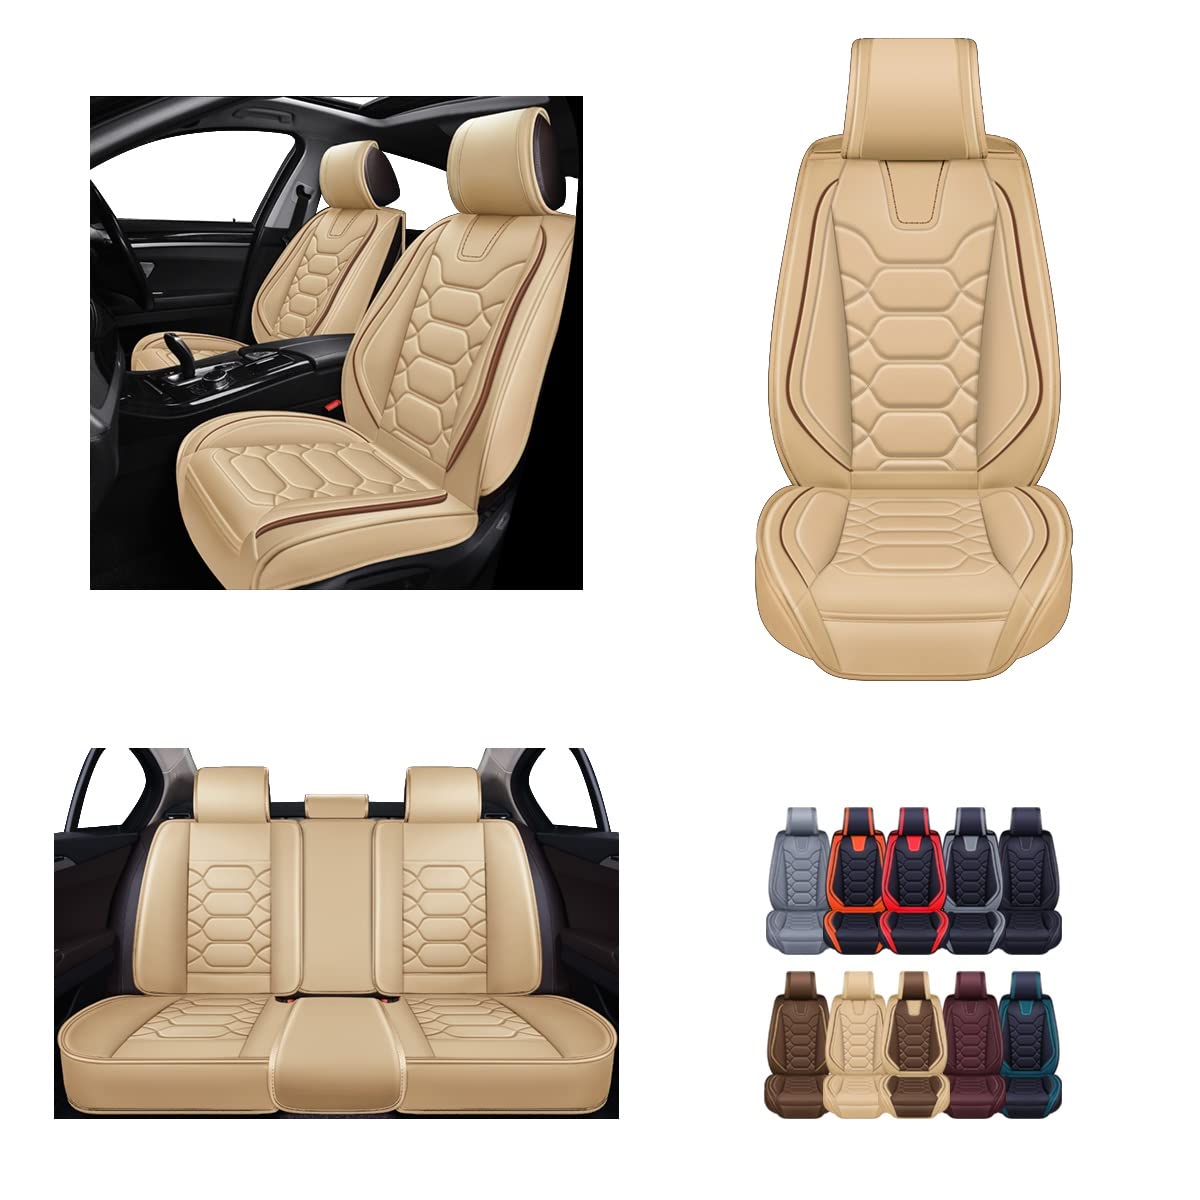 OASIS AUTO car Seat covers Accessories Full Set Premium Nappa Leather cushion Protector Universal Fit for Most cars SUV Pick-up 